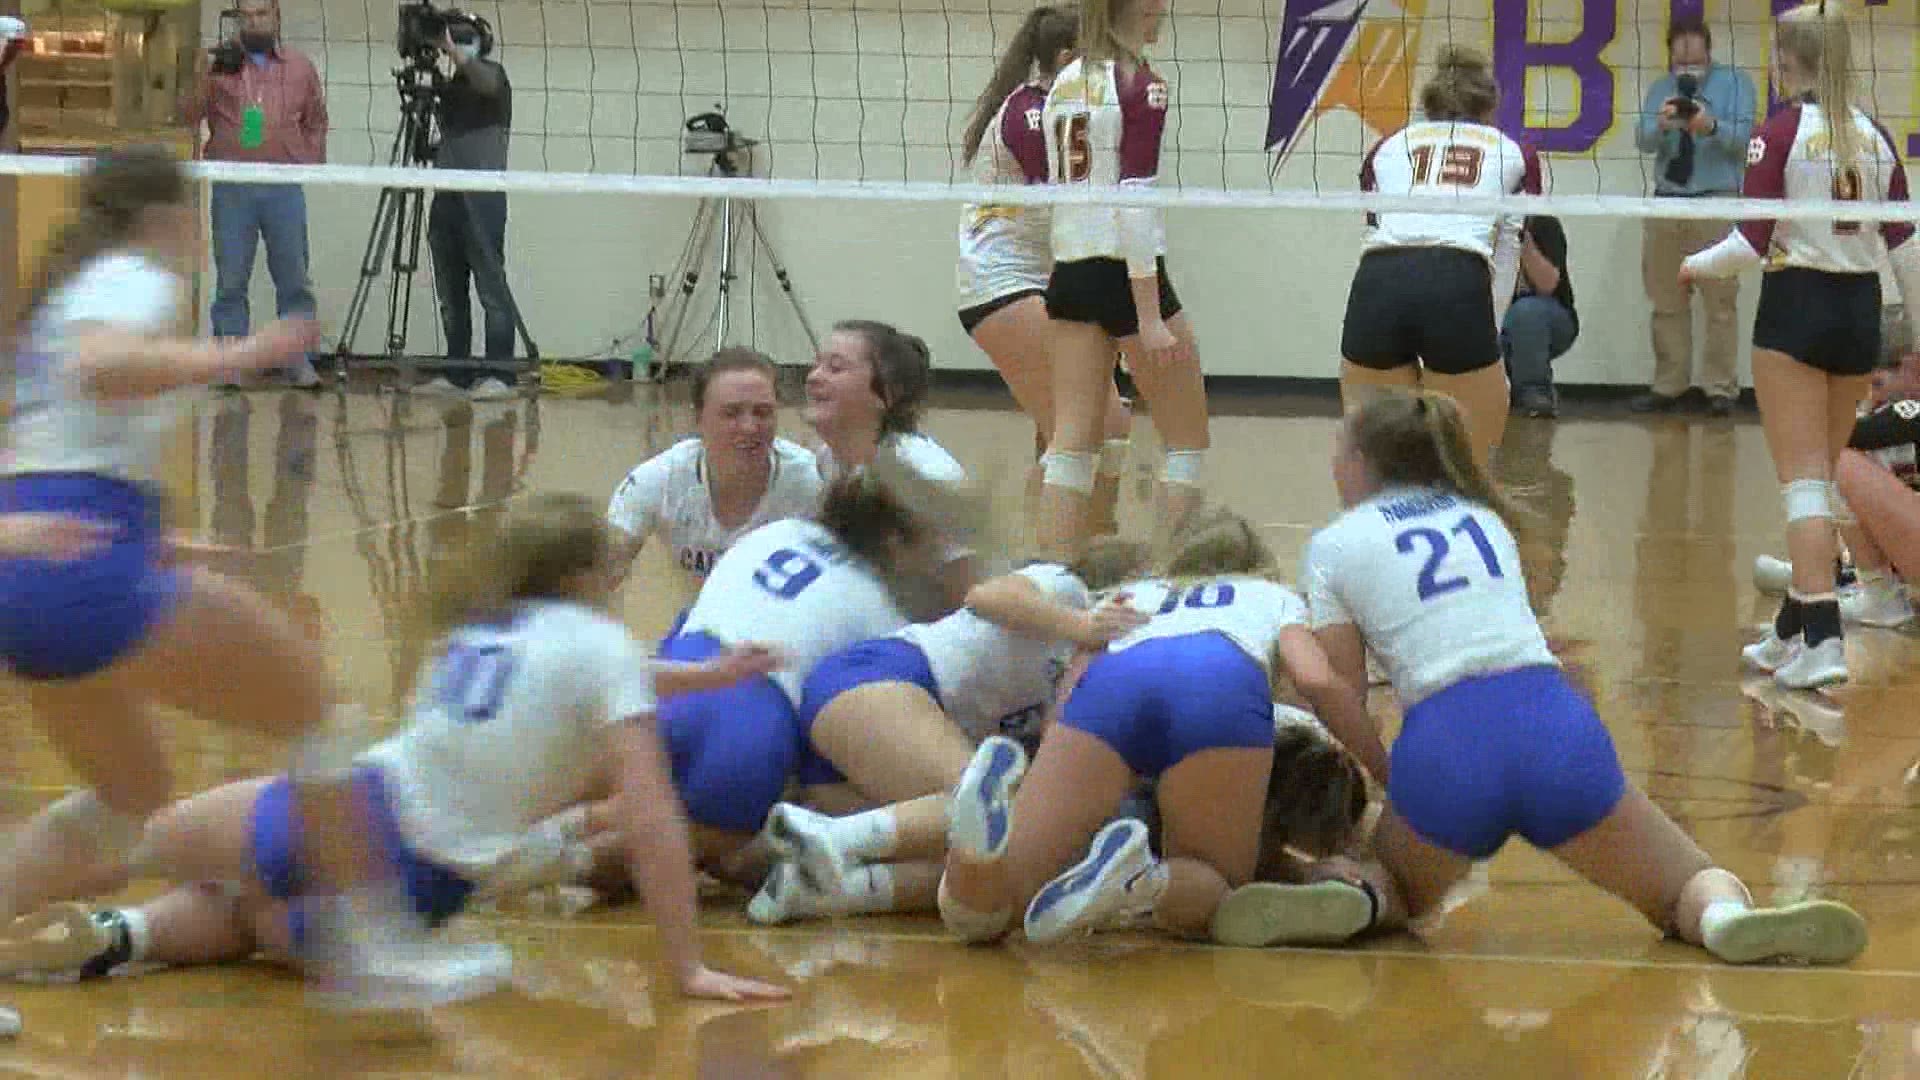 Kristi Kopanis brings you all the action from the D IV state finals volleyball match between Tiffin Calvert and New Bremen that saw the Senecas win the championship.